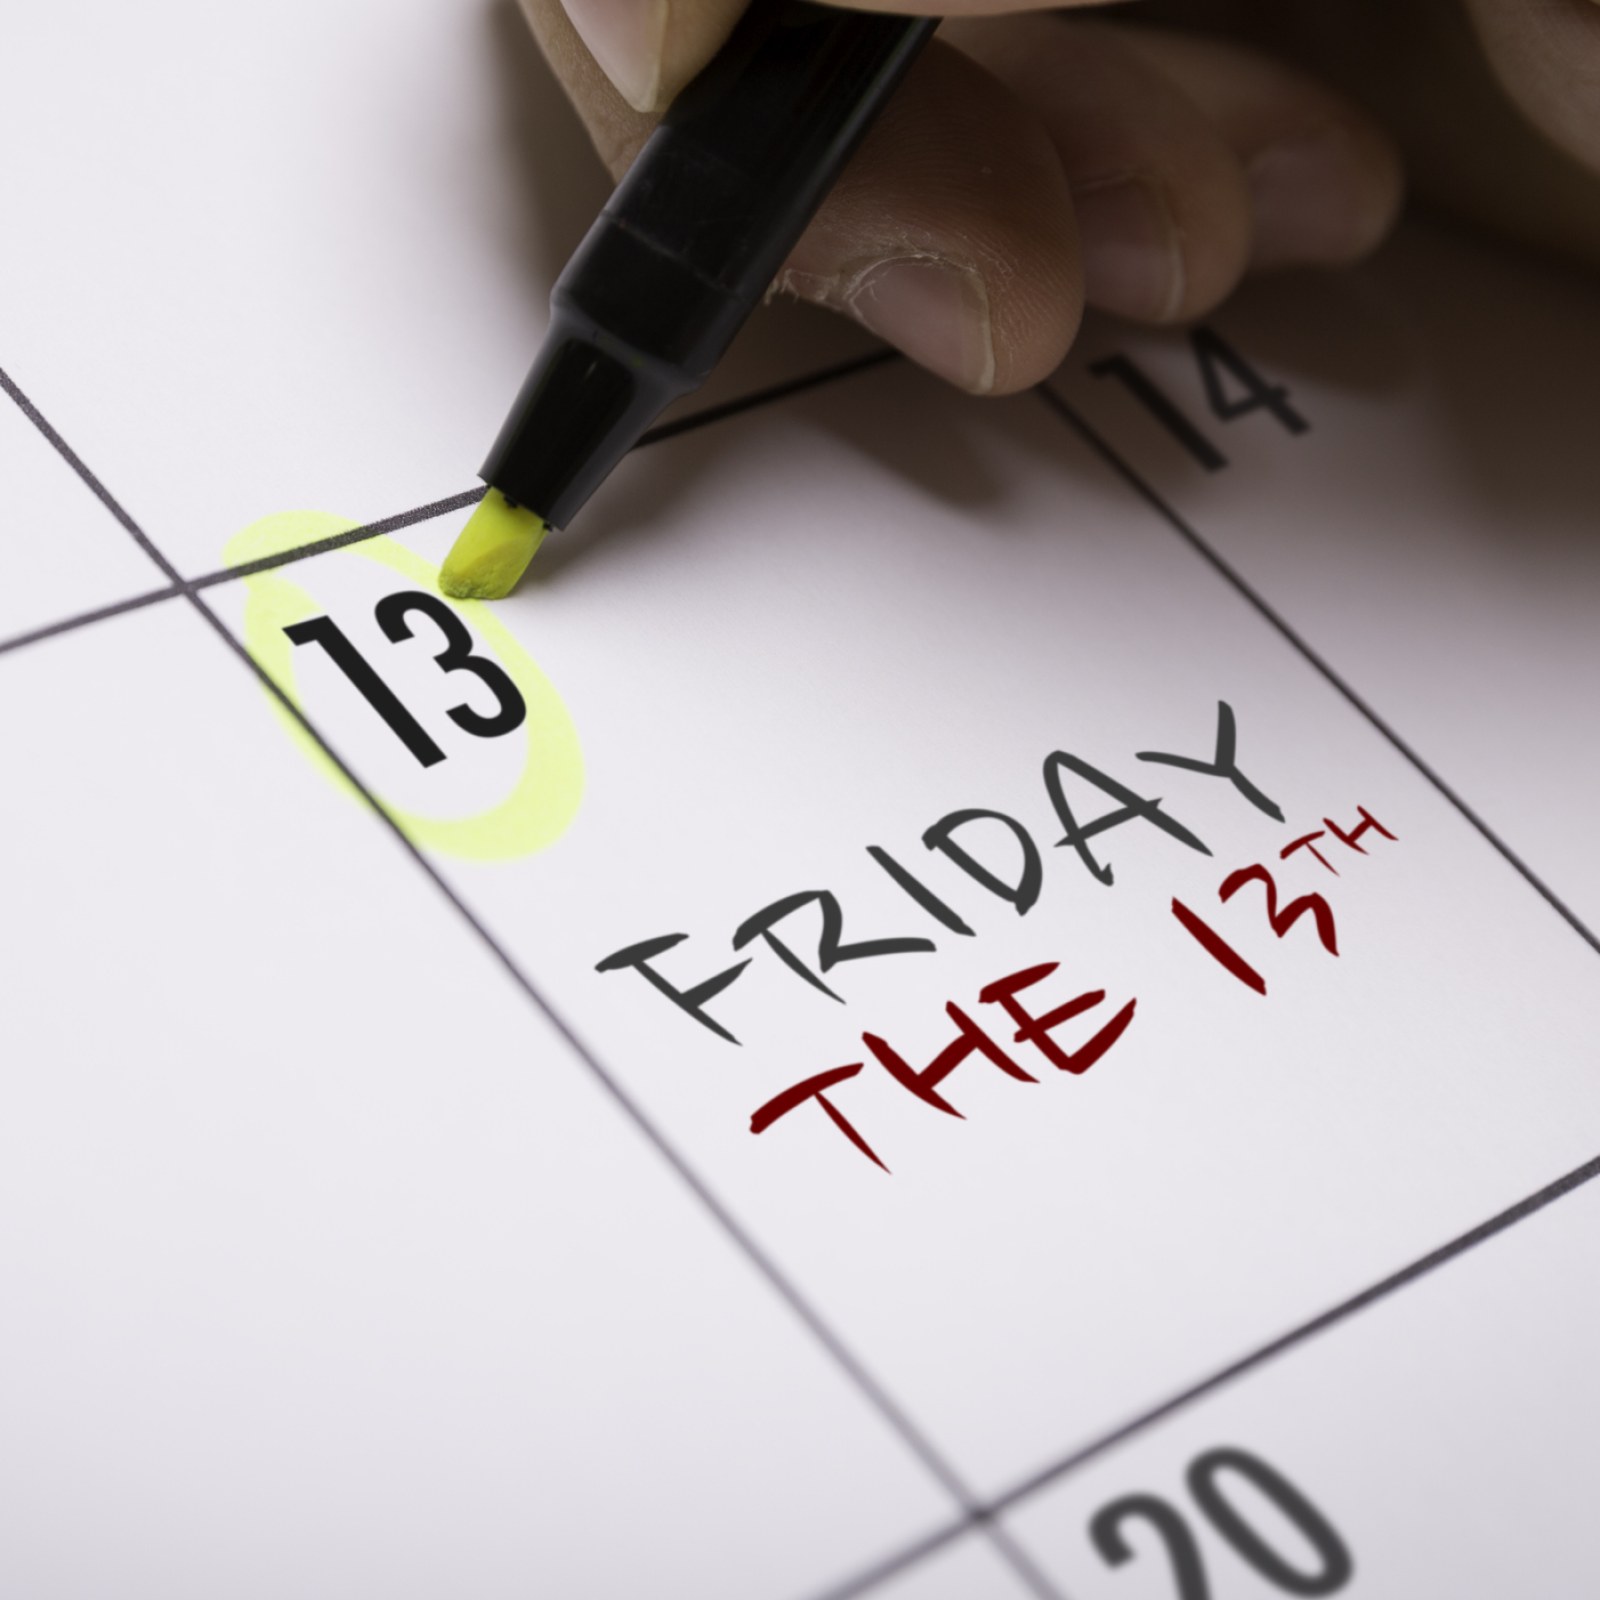 Friday the 13th: Memes, Quotes and Images to Mark the 'Unlucky' Day